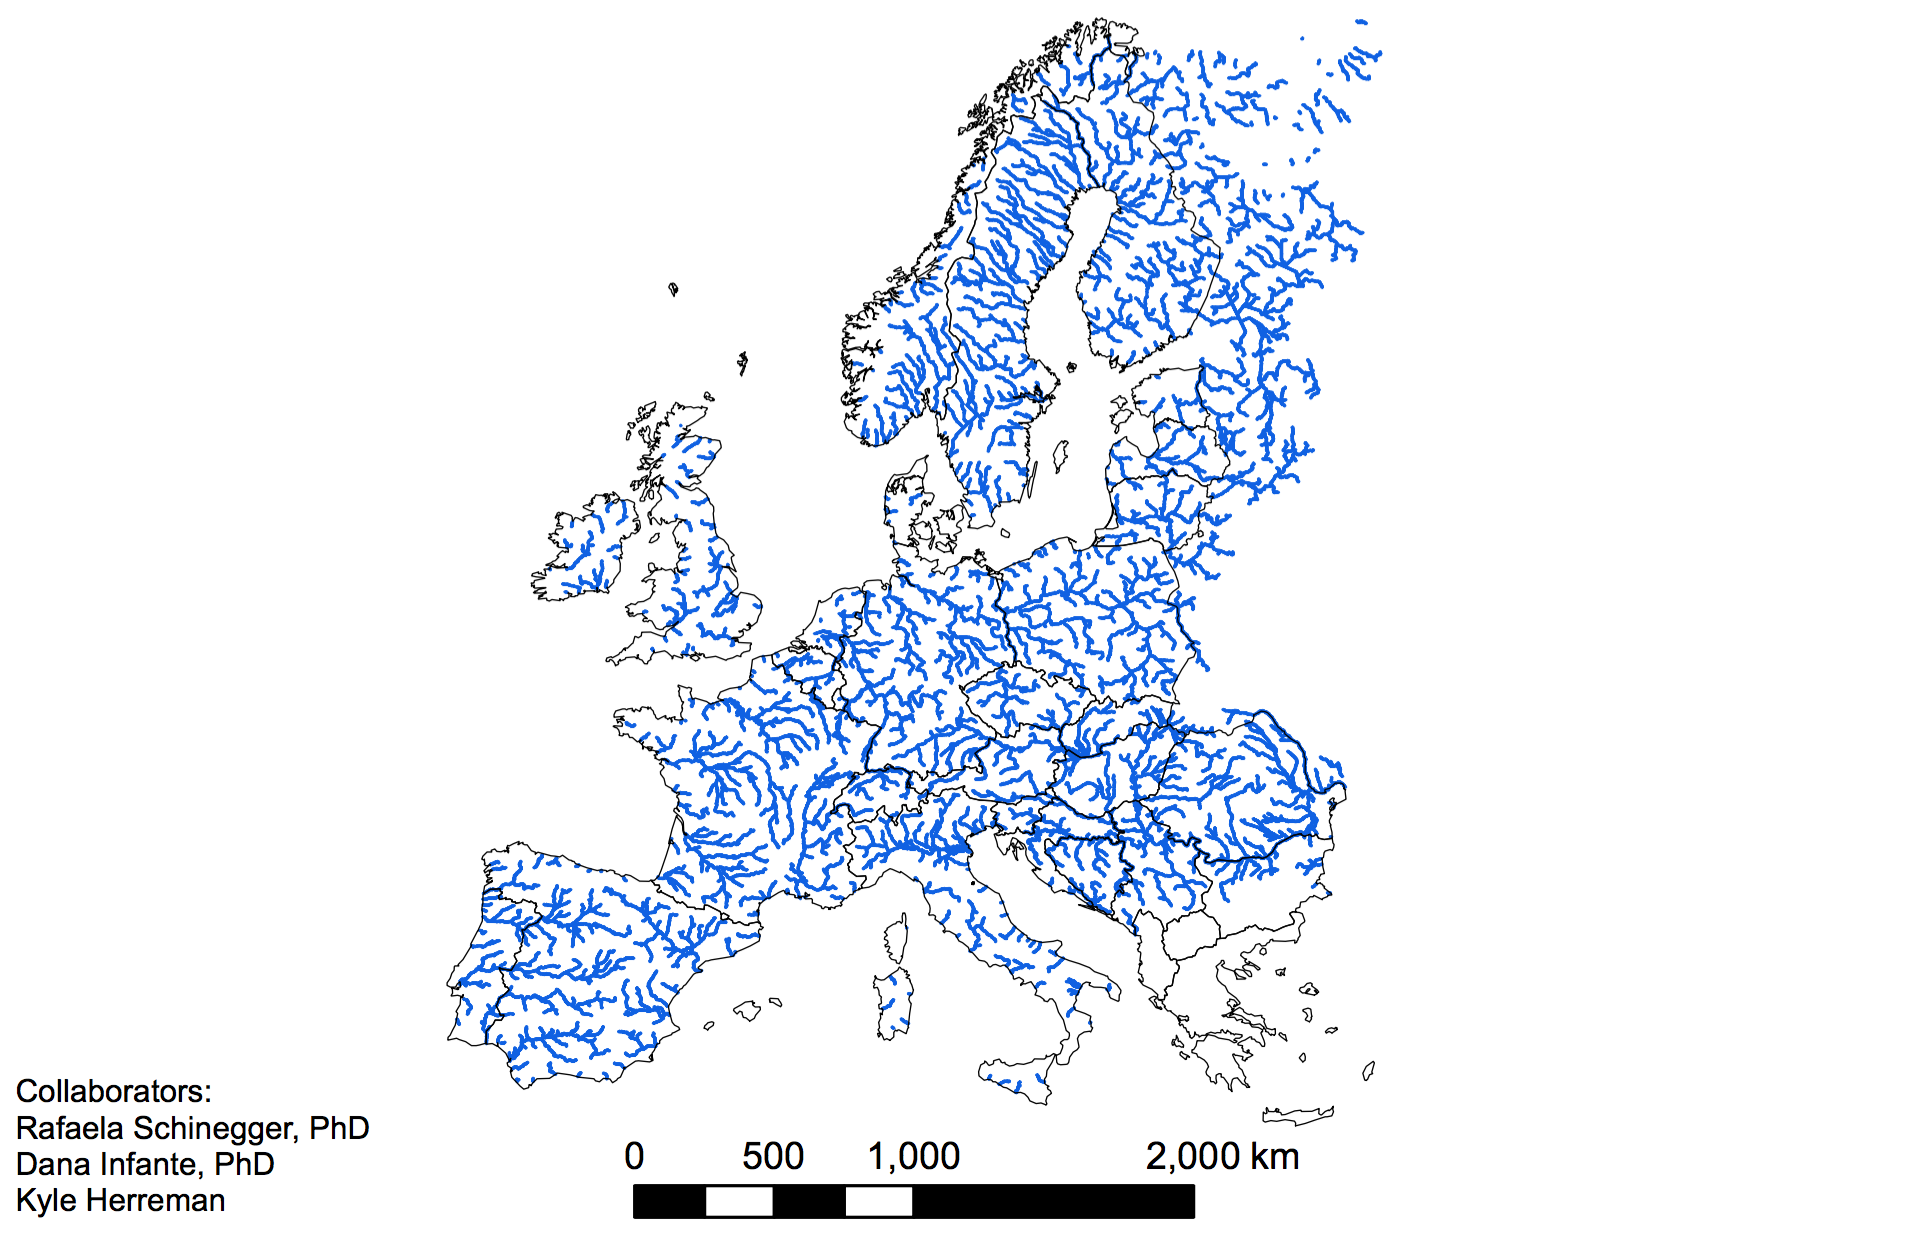 Large rivers (>1000km2 catchment size) in Europe.